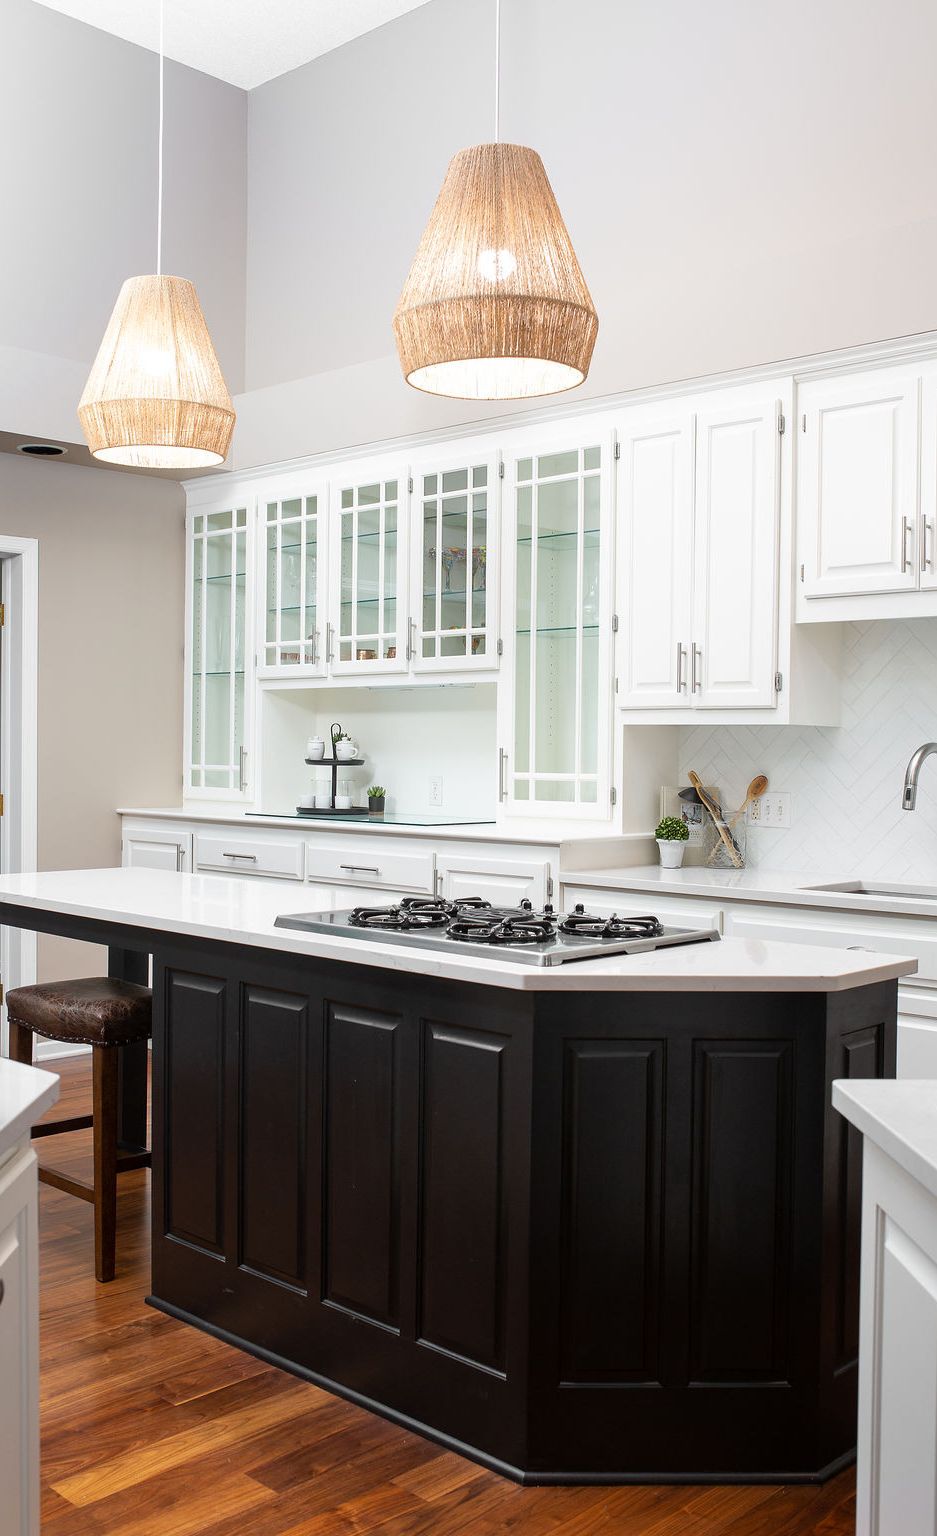 Pendant lights and dark cabinetry create a focal point for the Ella-topped kitchen island.